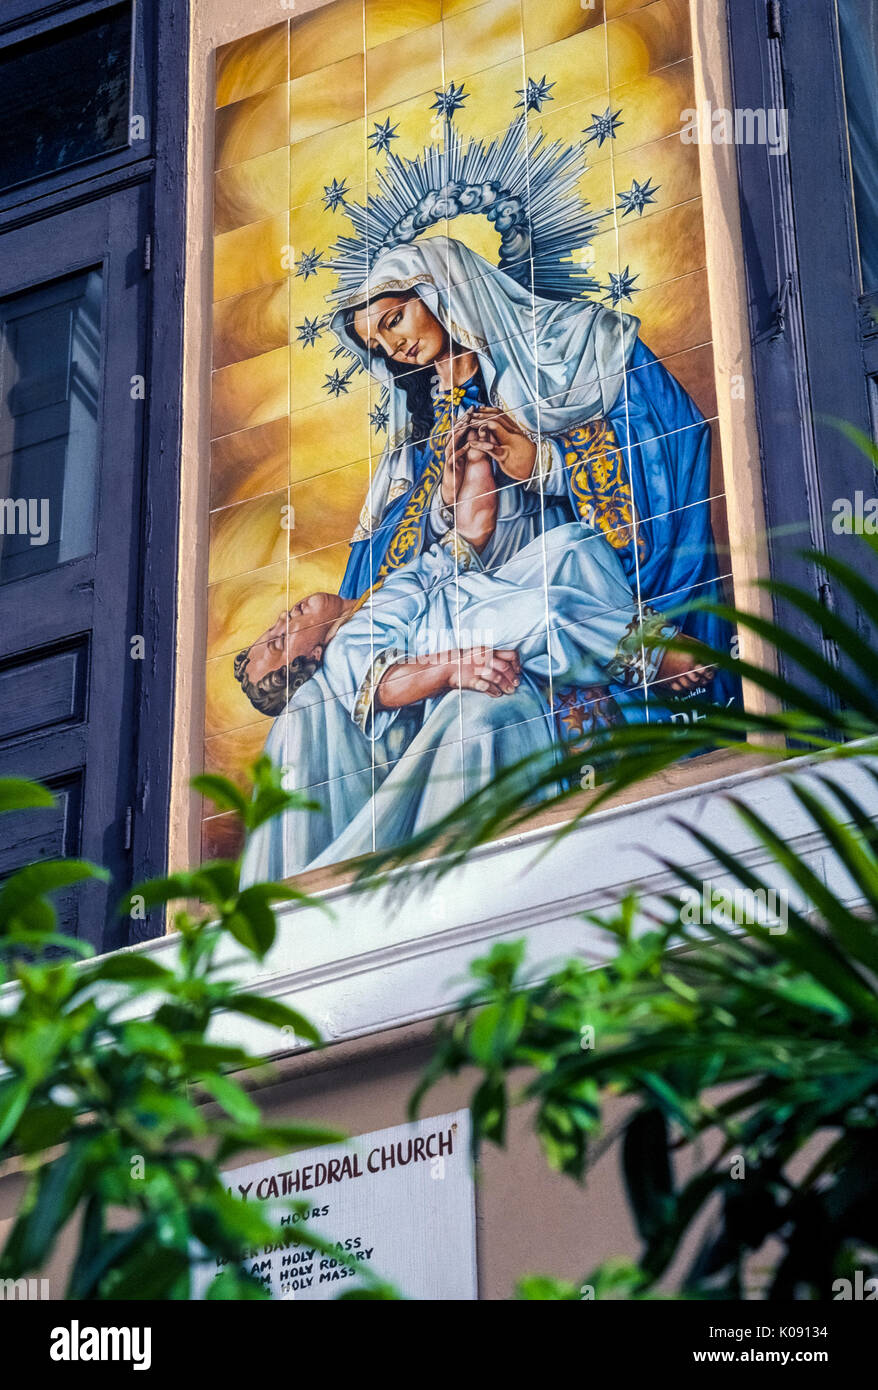 This religious artwork of colorful ceramic tiles showing the Virgin Mary holding baby Jesus is on the exterior of the Cathedral of San Juan Bautista in historic Old San Juan in the Commonwealth of Puerto Rico (PR), an unincorporated territory of the United States in the Caribbean Sea. The cathedral was built in the early 1500s and holds the marble tomb of Ponce de Leon, the famed Spanish explorer who founded San Juan. Stock Photo